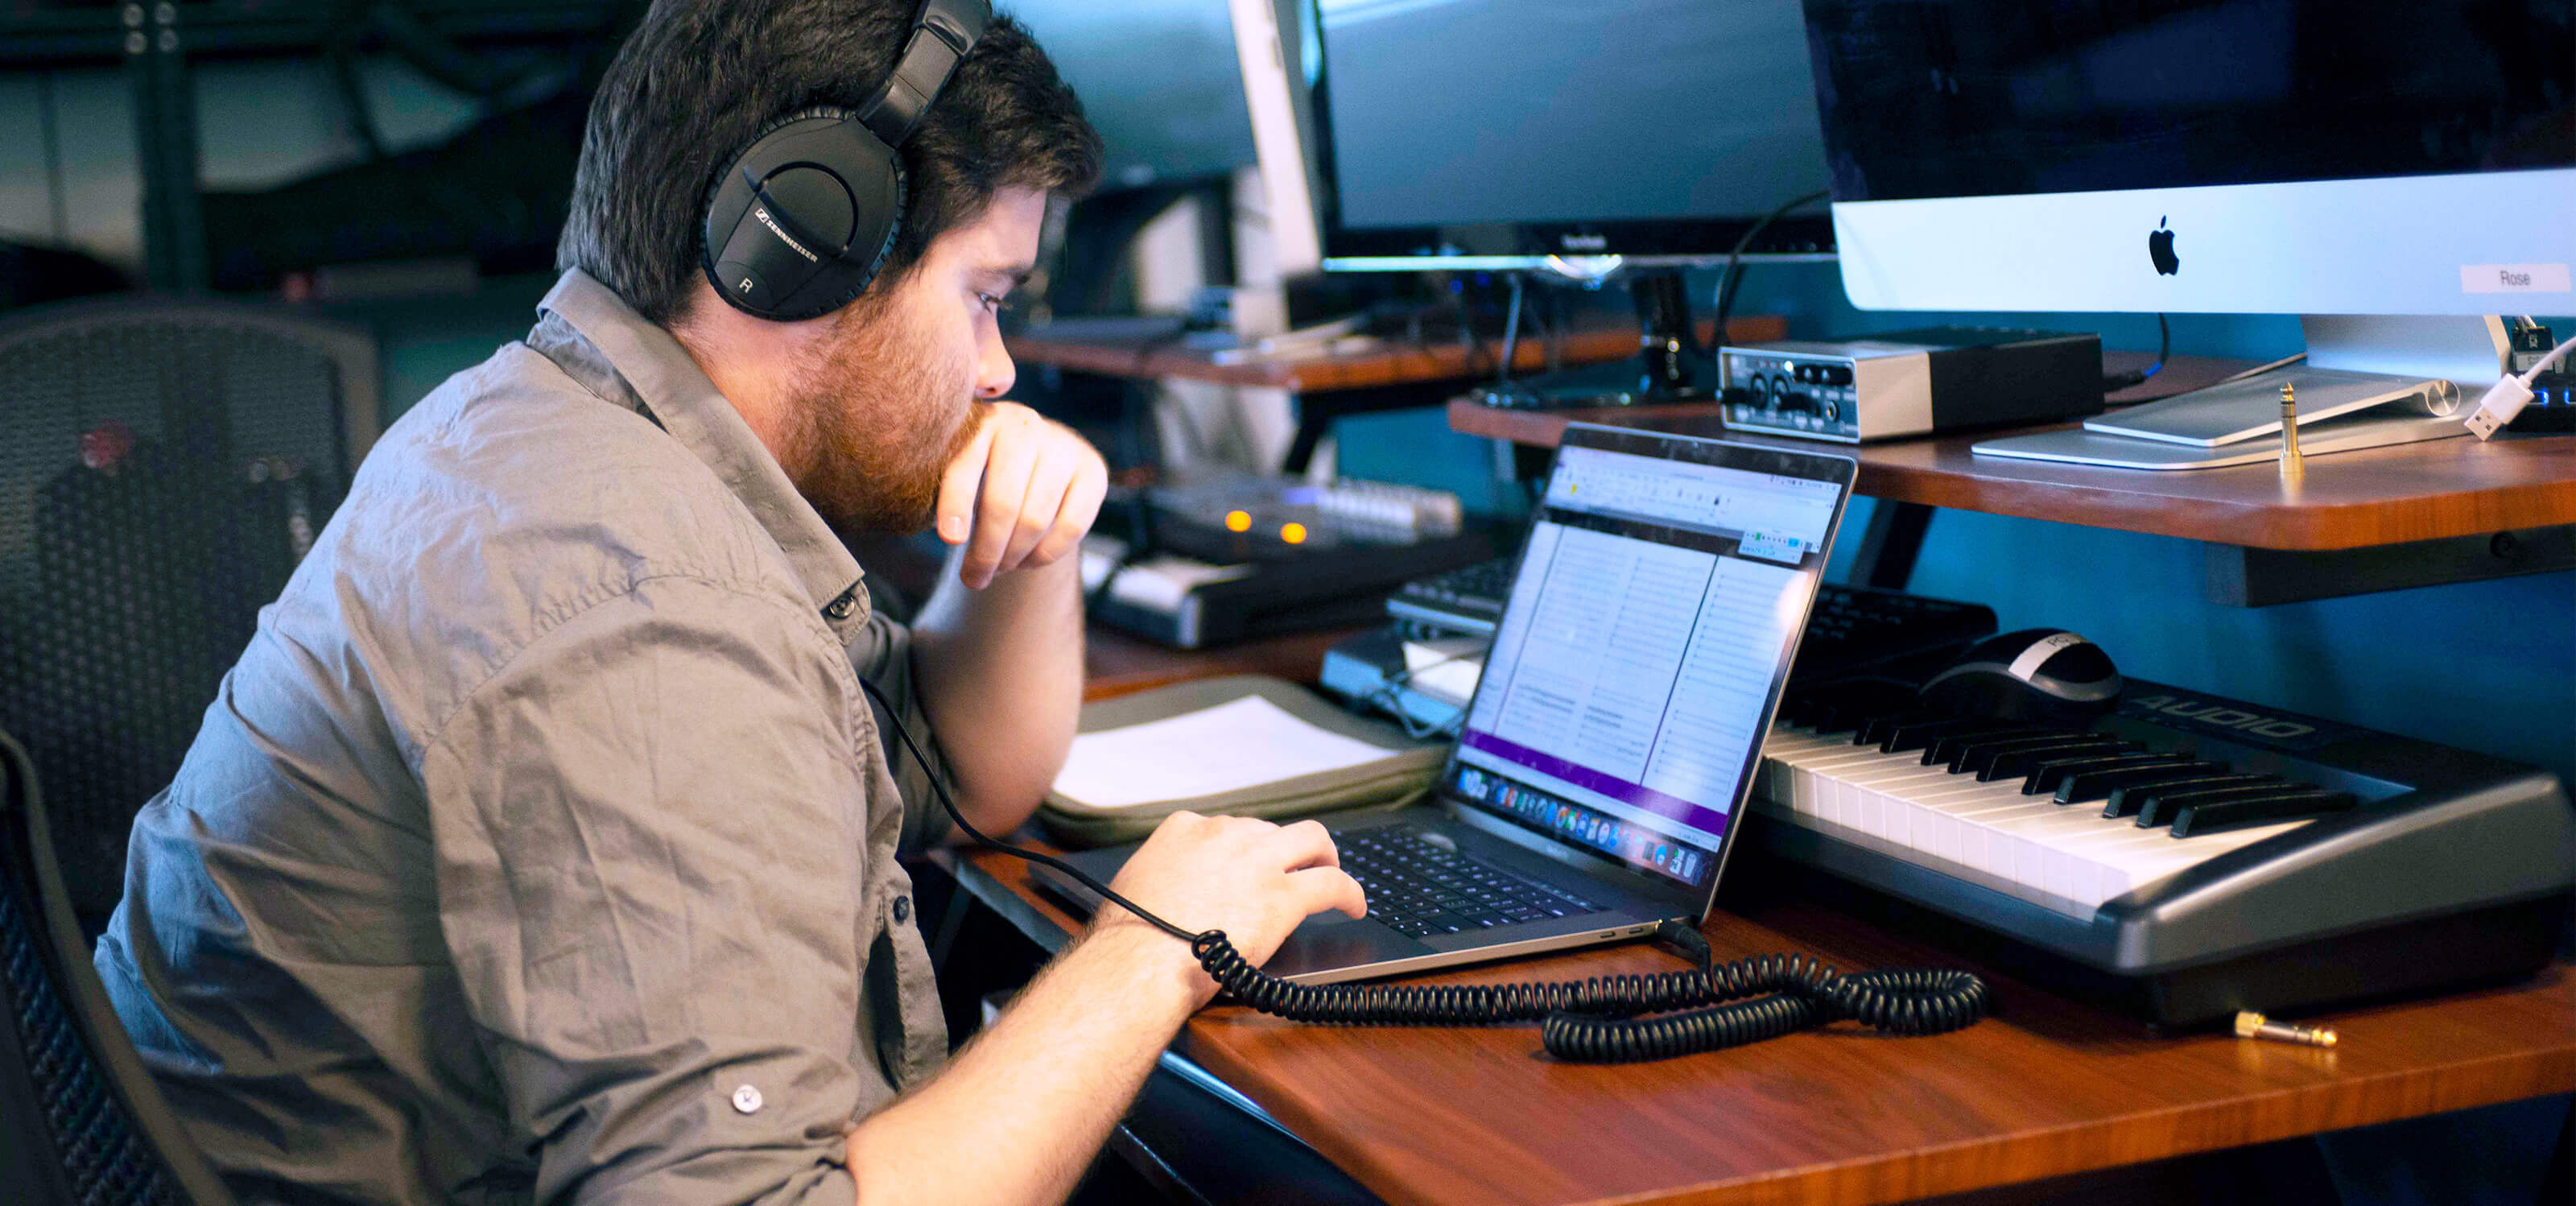 A DigiPen music student wearing headphones works at their laptop in front of a synthesizer.